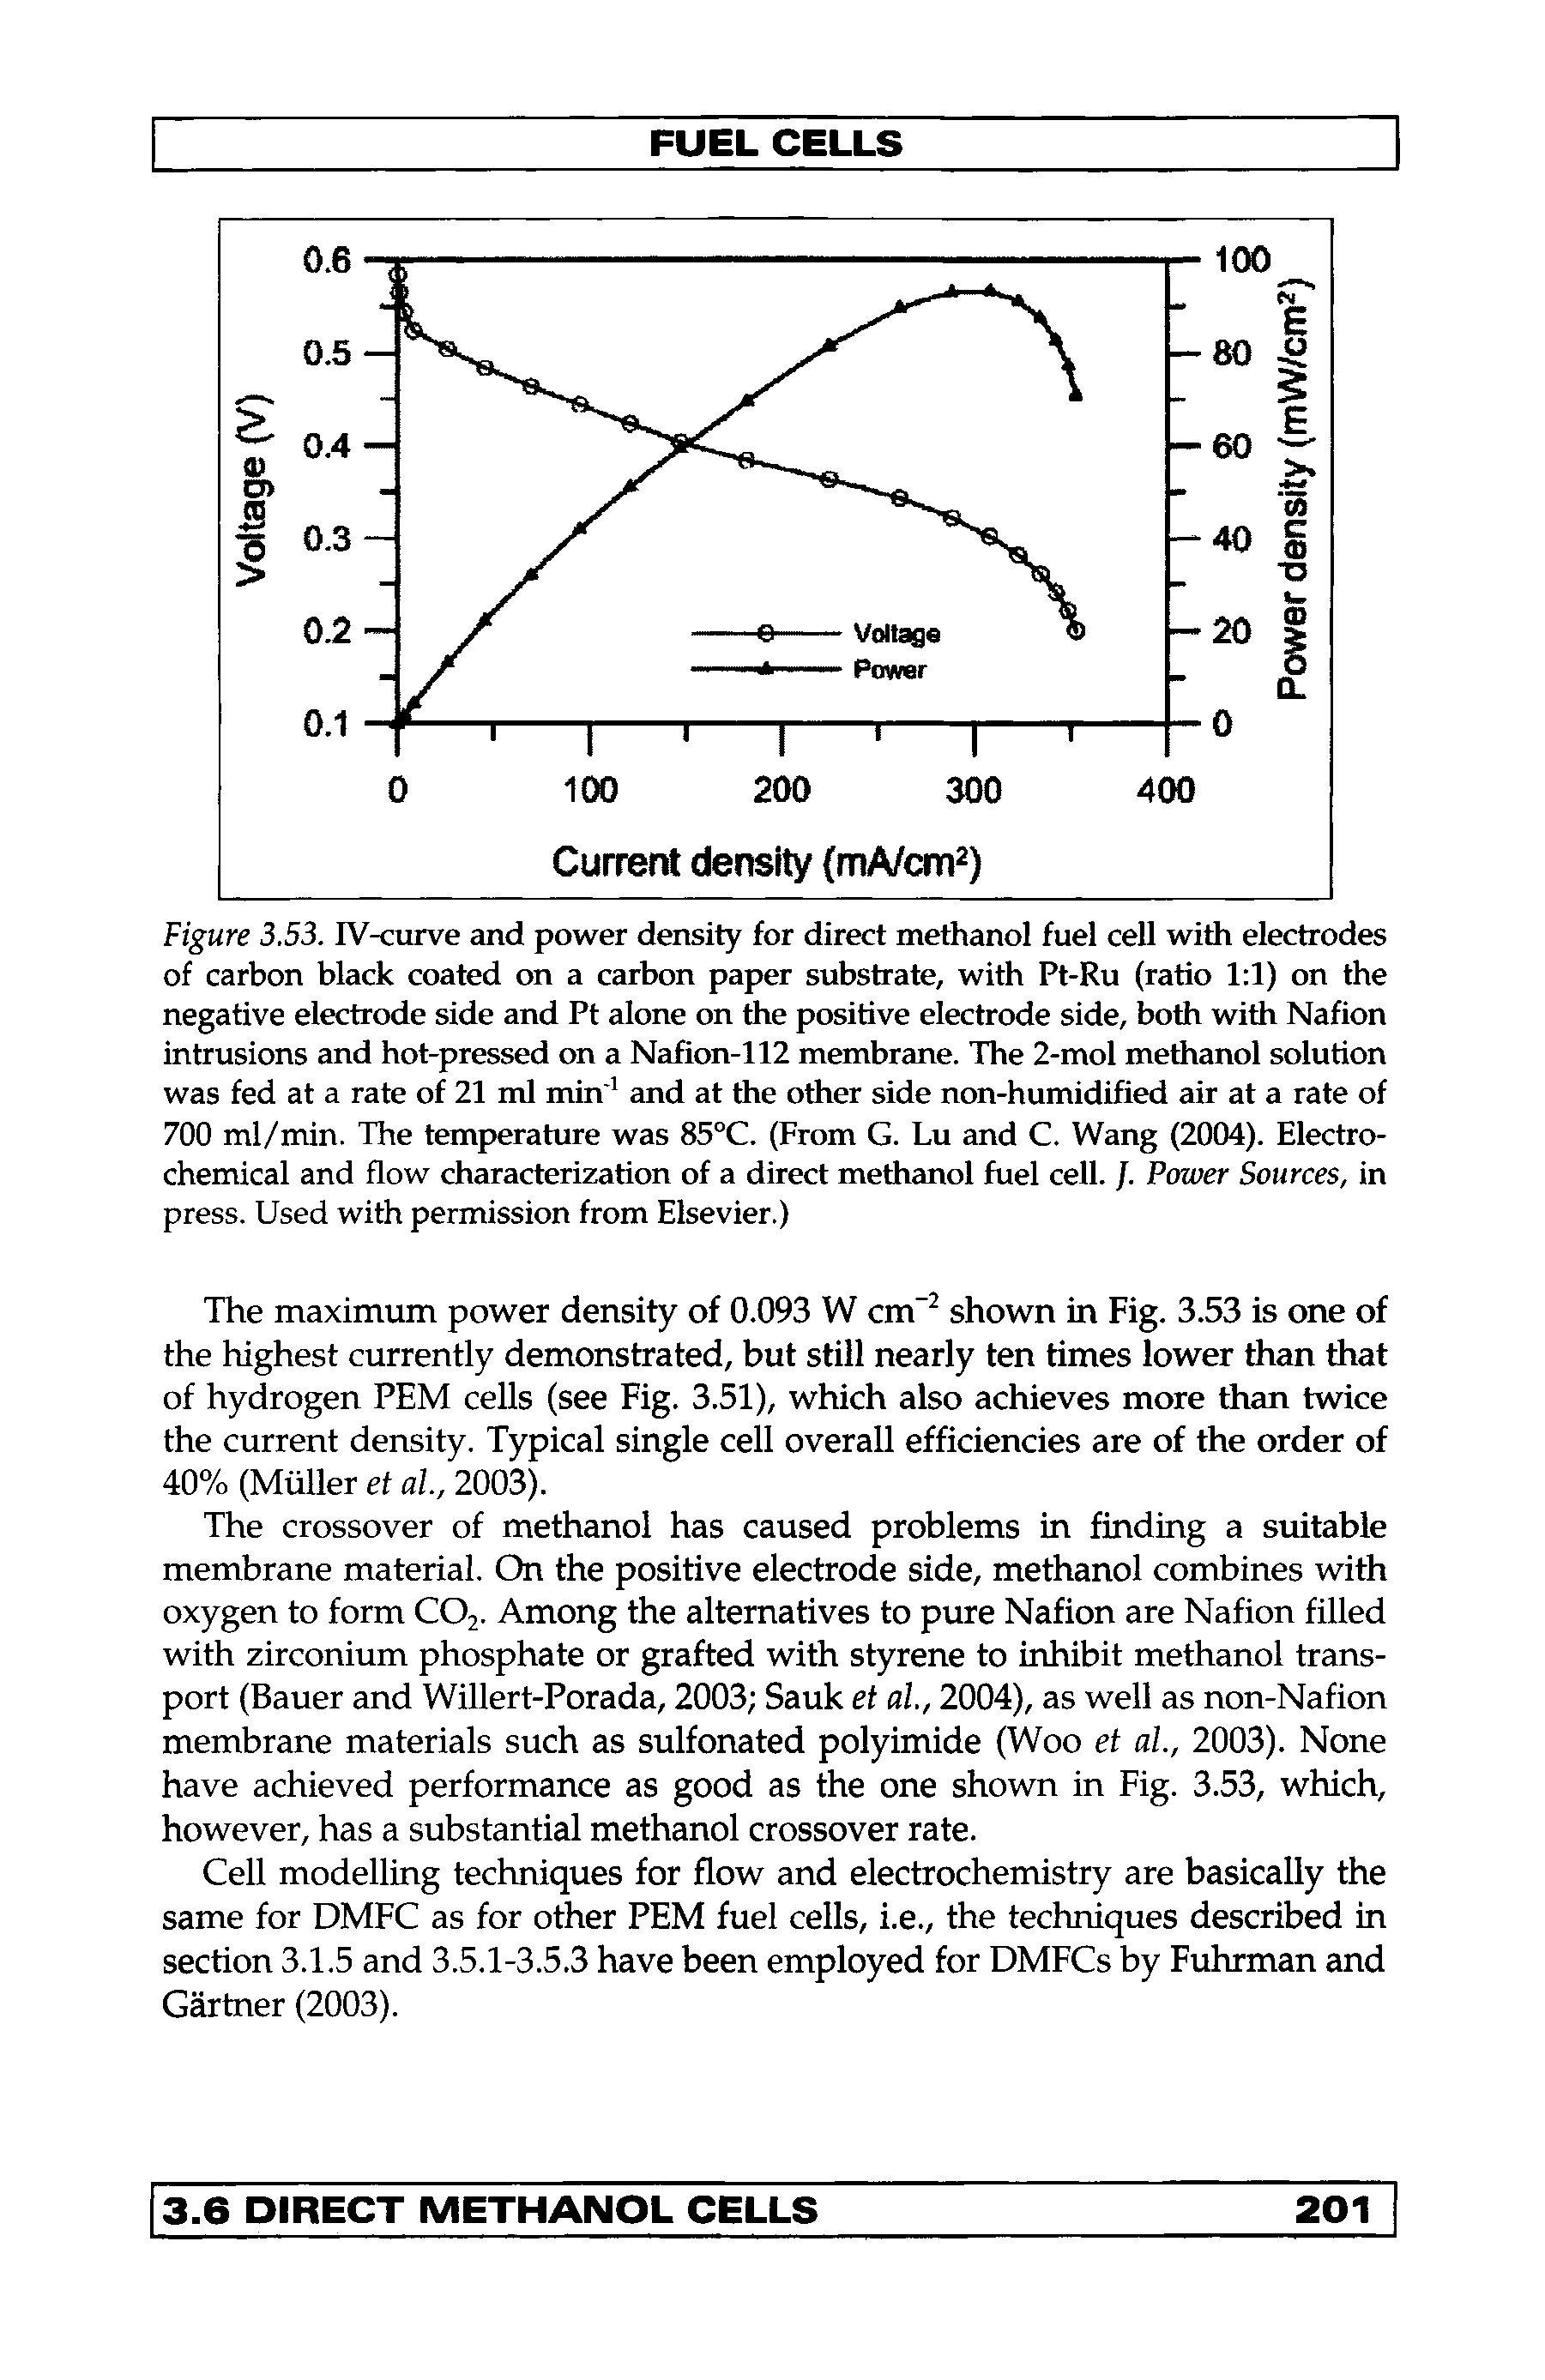 Figure 3.53. IV-curve and power density for direct methanol fuel cell with electrodes of carbon black coated on a carbon paper substrate, with Pt-Ru (ratio 1 1) on the negative electrode side and Pt alone on the positive electrode side, both with Nafion intrusions and hot-pressed on a Nafion-112 membrane. The 2-mol methanol solution was fed at a rate of 21 ml min and at the other side non-humidified air at a rate of 700 ml/min. The temperature was 85°C. (From G. Lu and C. Wang (2004). Electrochemical and flow characterization of a direct methanol fuel cell. /. Power Sources, in press. Used with permission from Elsevier.)...